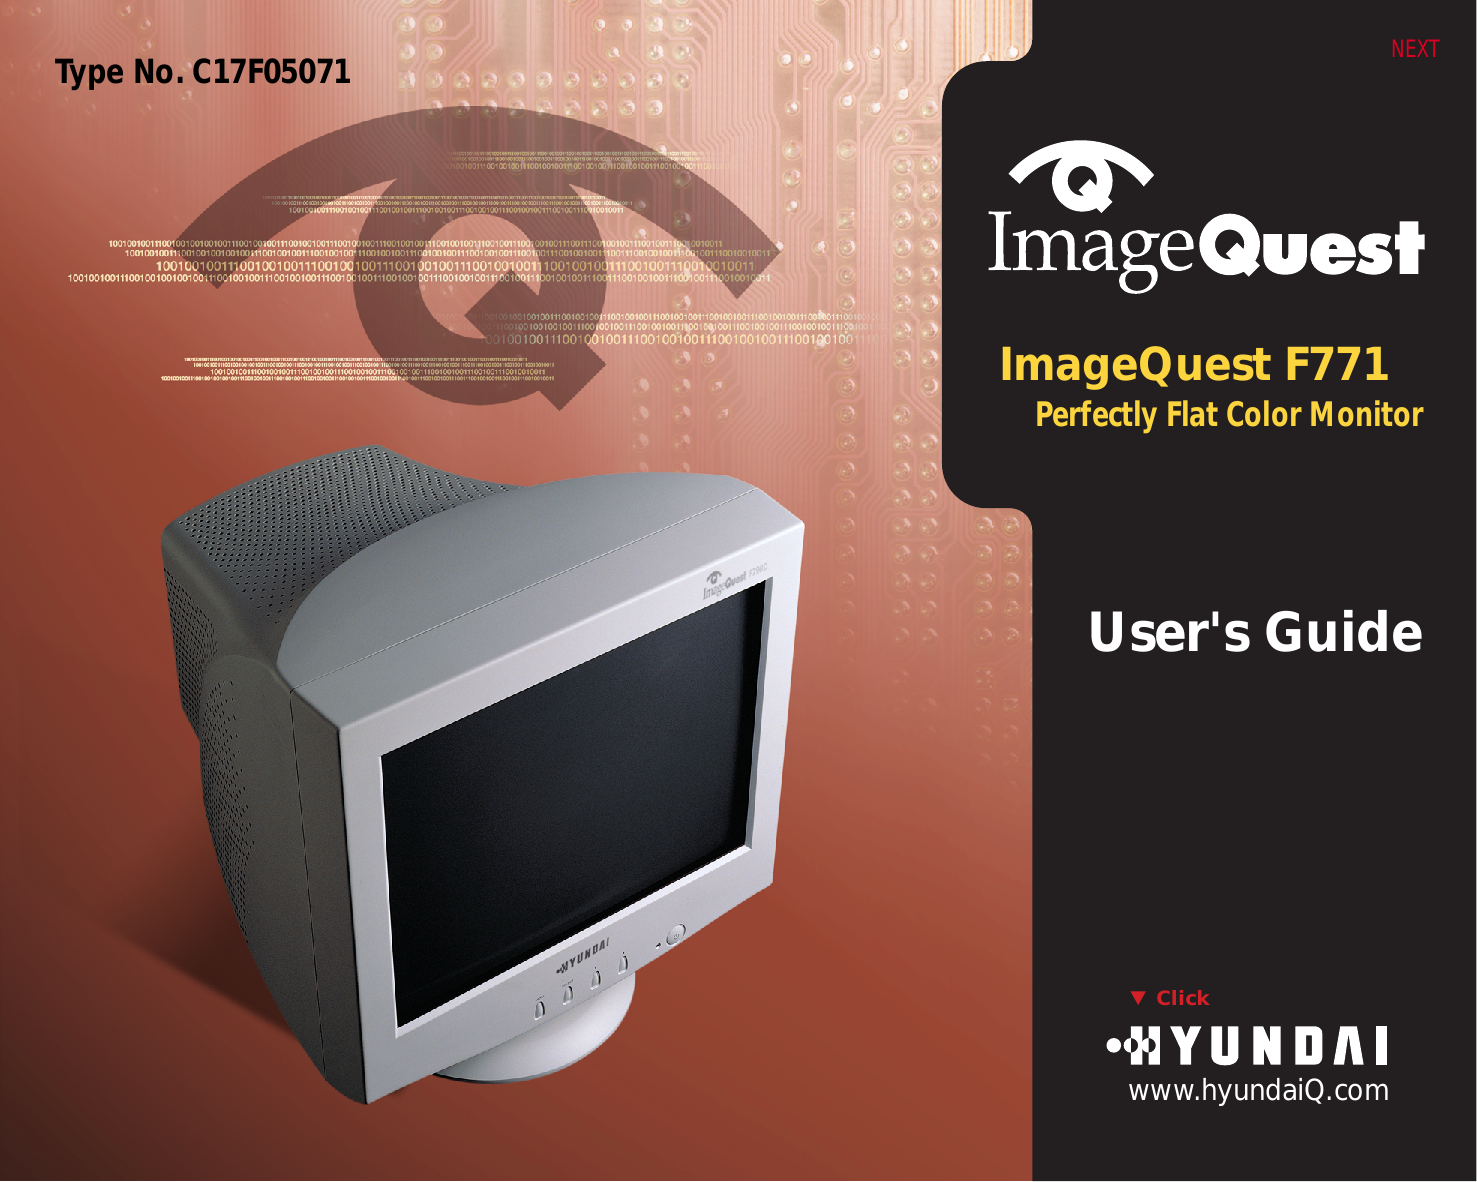 ImageQuest F771Perfectly Flat Color MonitorUser&apos;s GuideClickwww.hyundaiQ.comNEXTType No. C17F05071